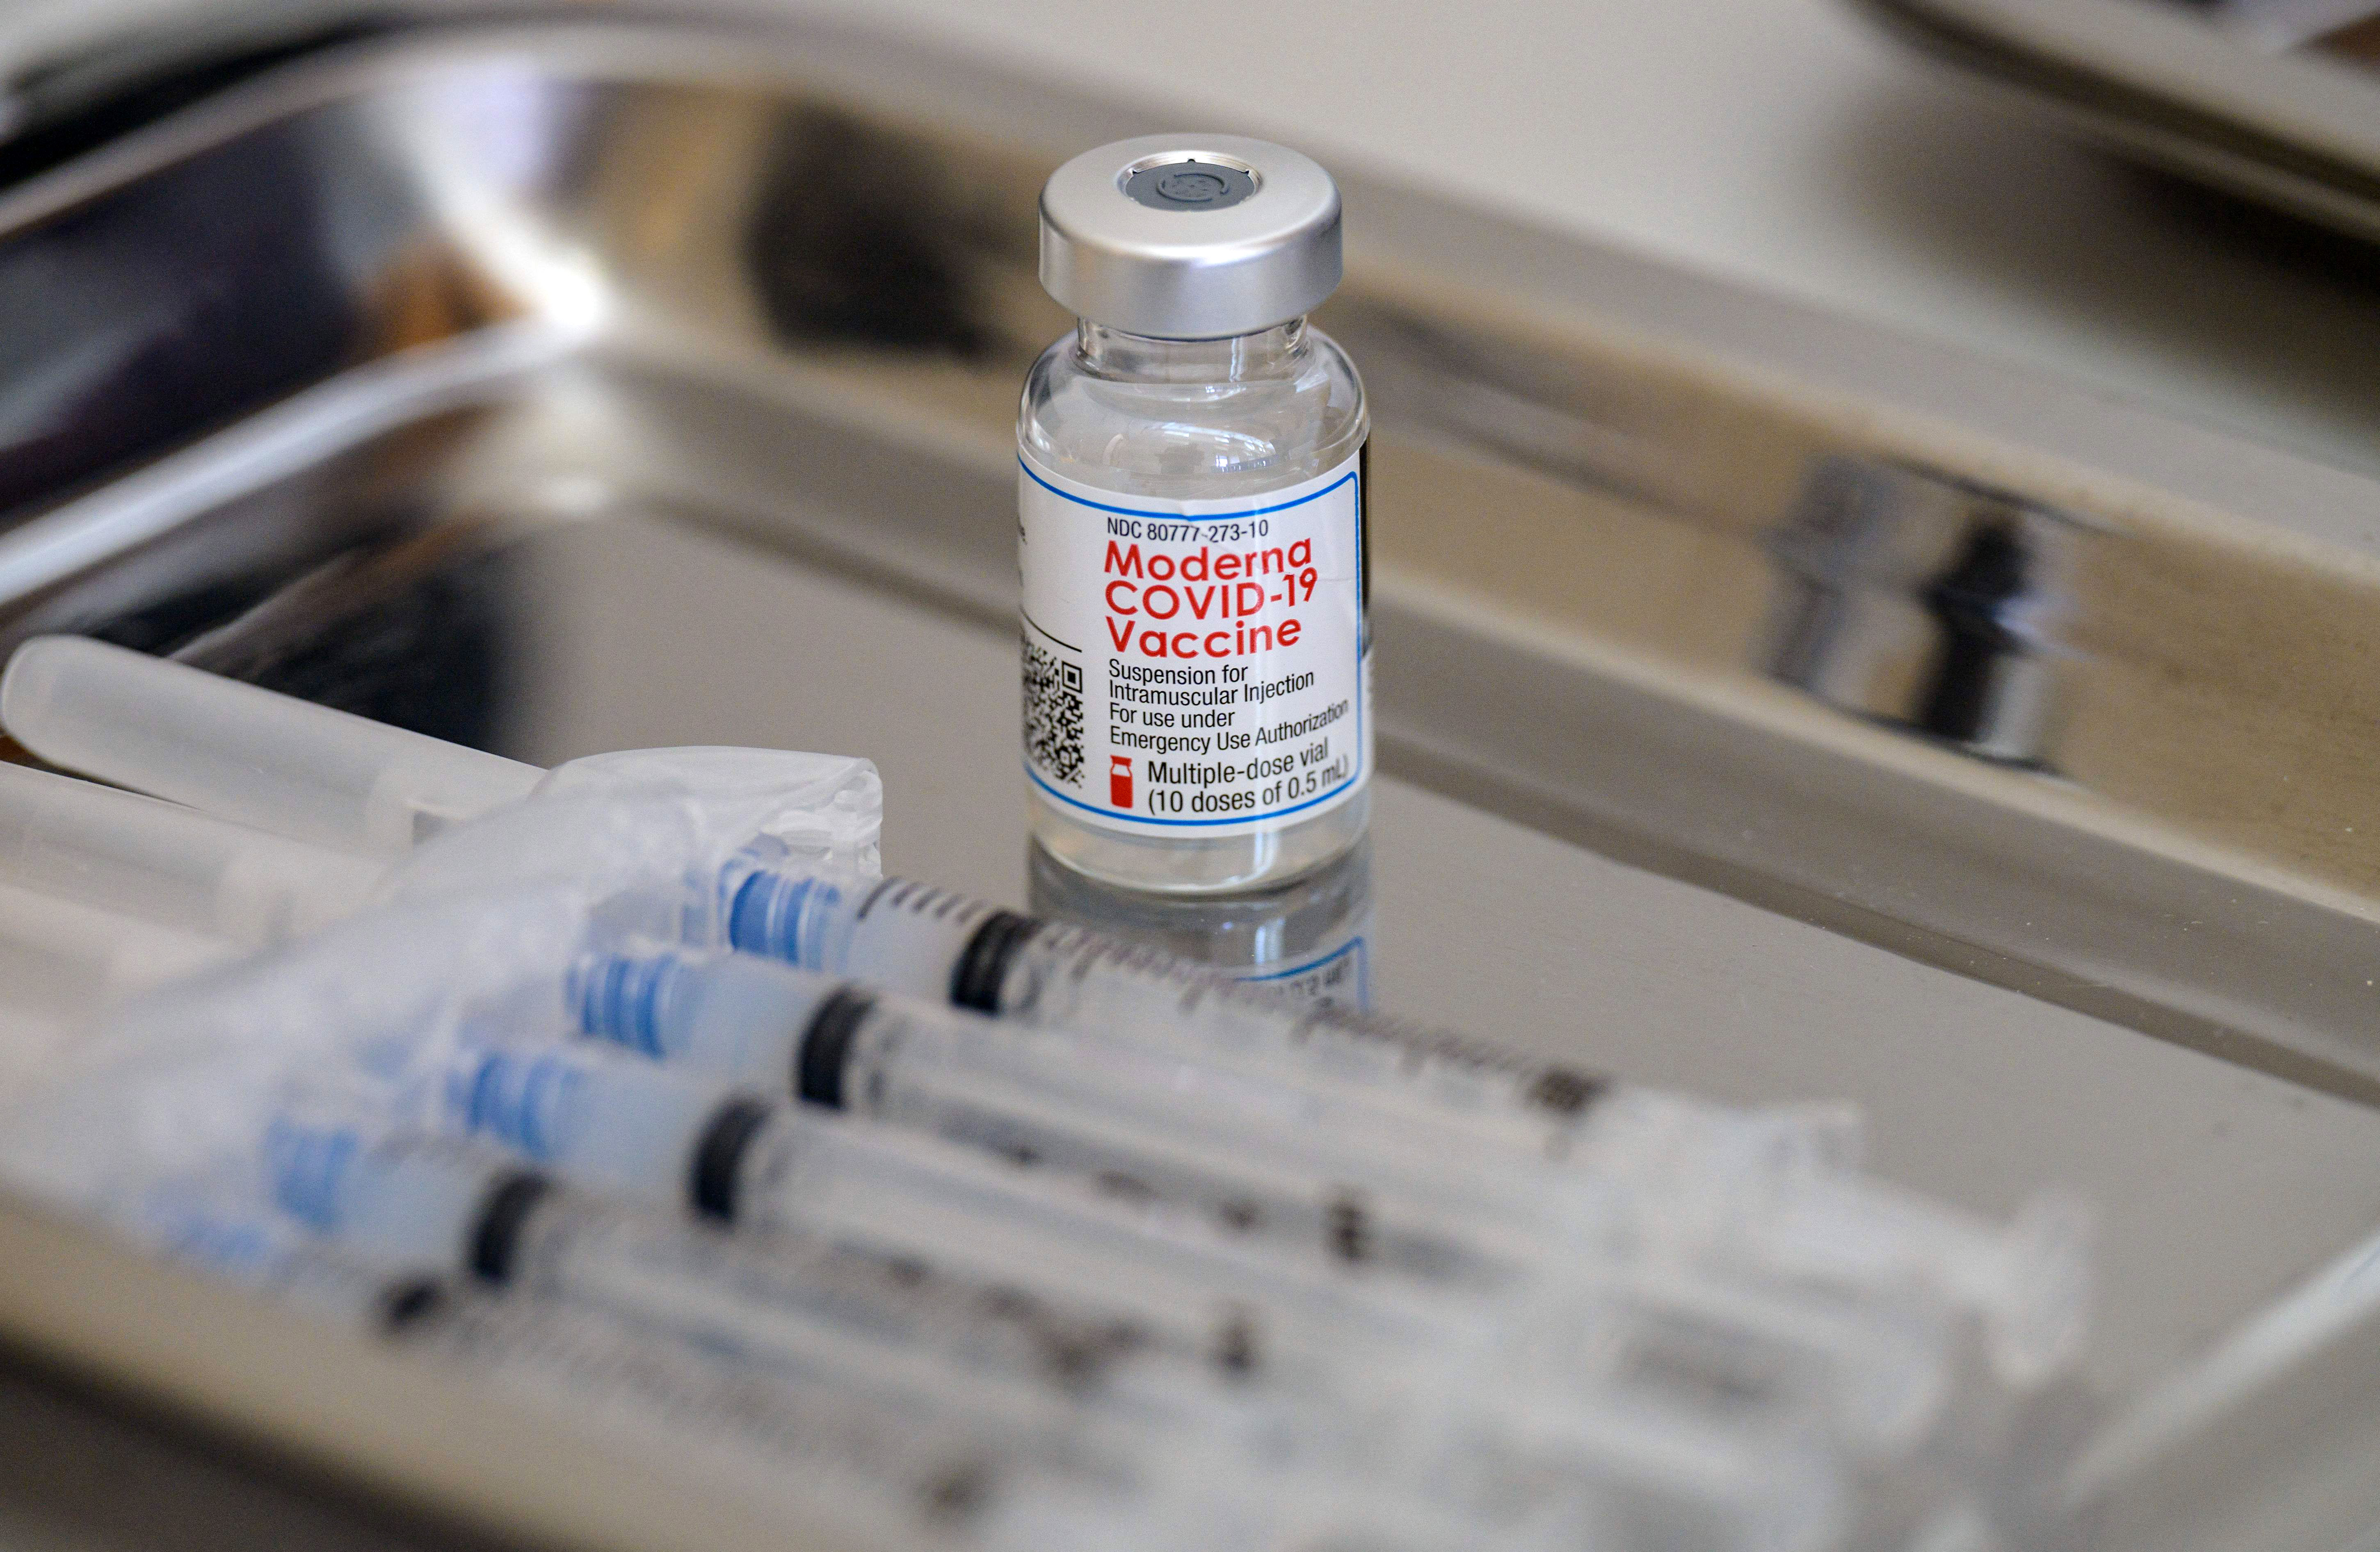 A vial of the Moderna Covid-19 vaccine and syringes are prepared in Staten Island, New York, on April 16.